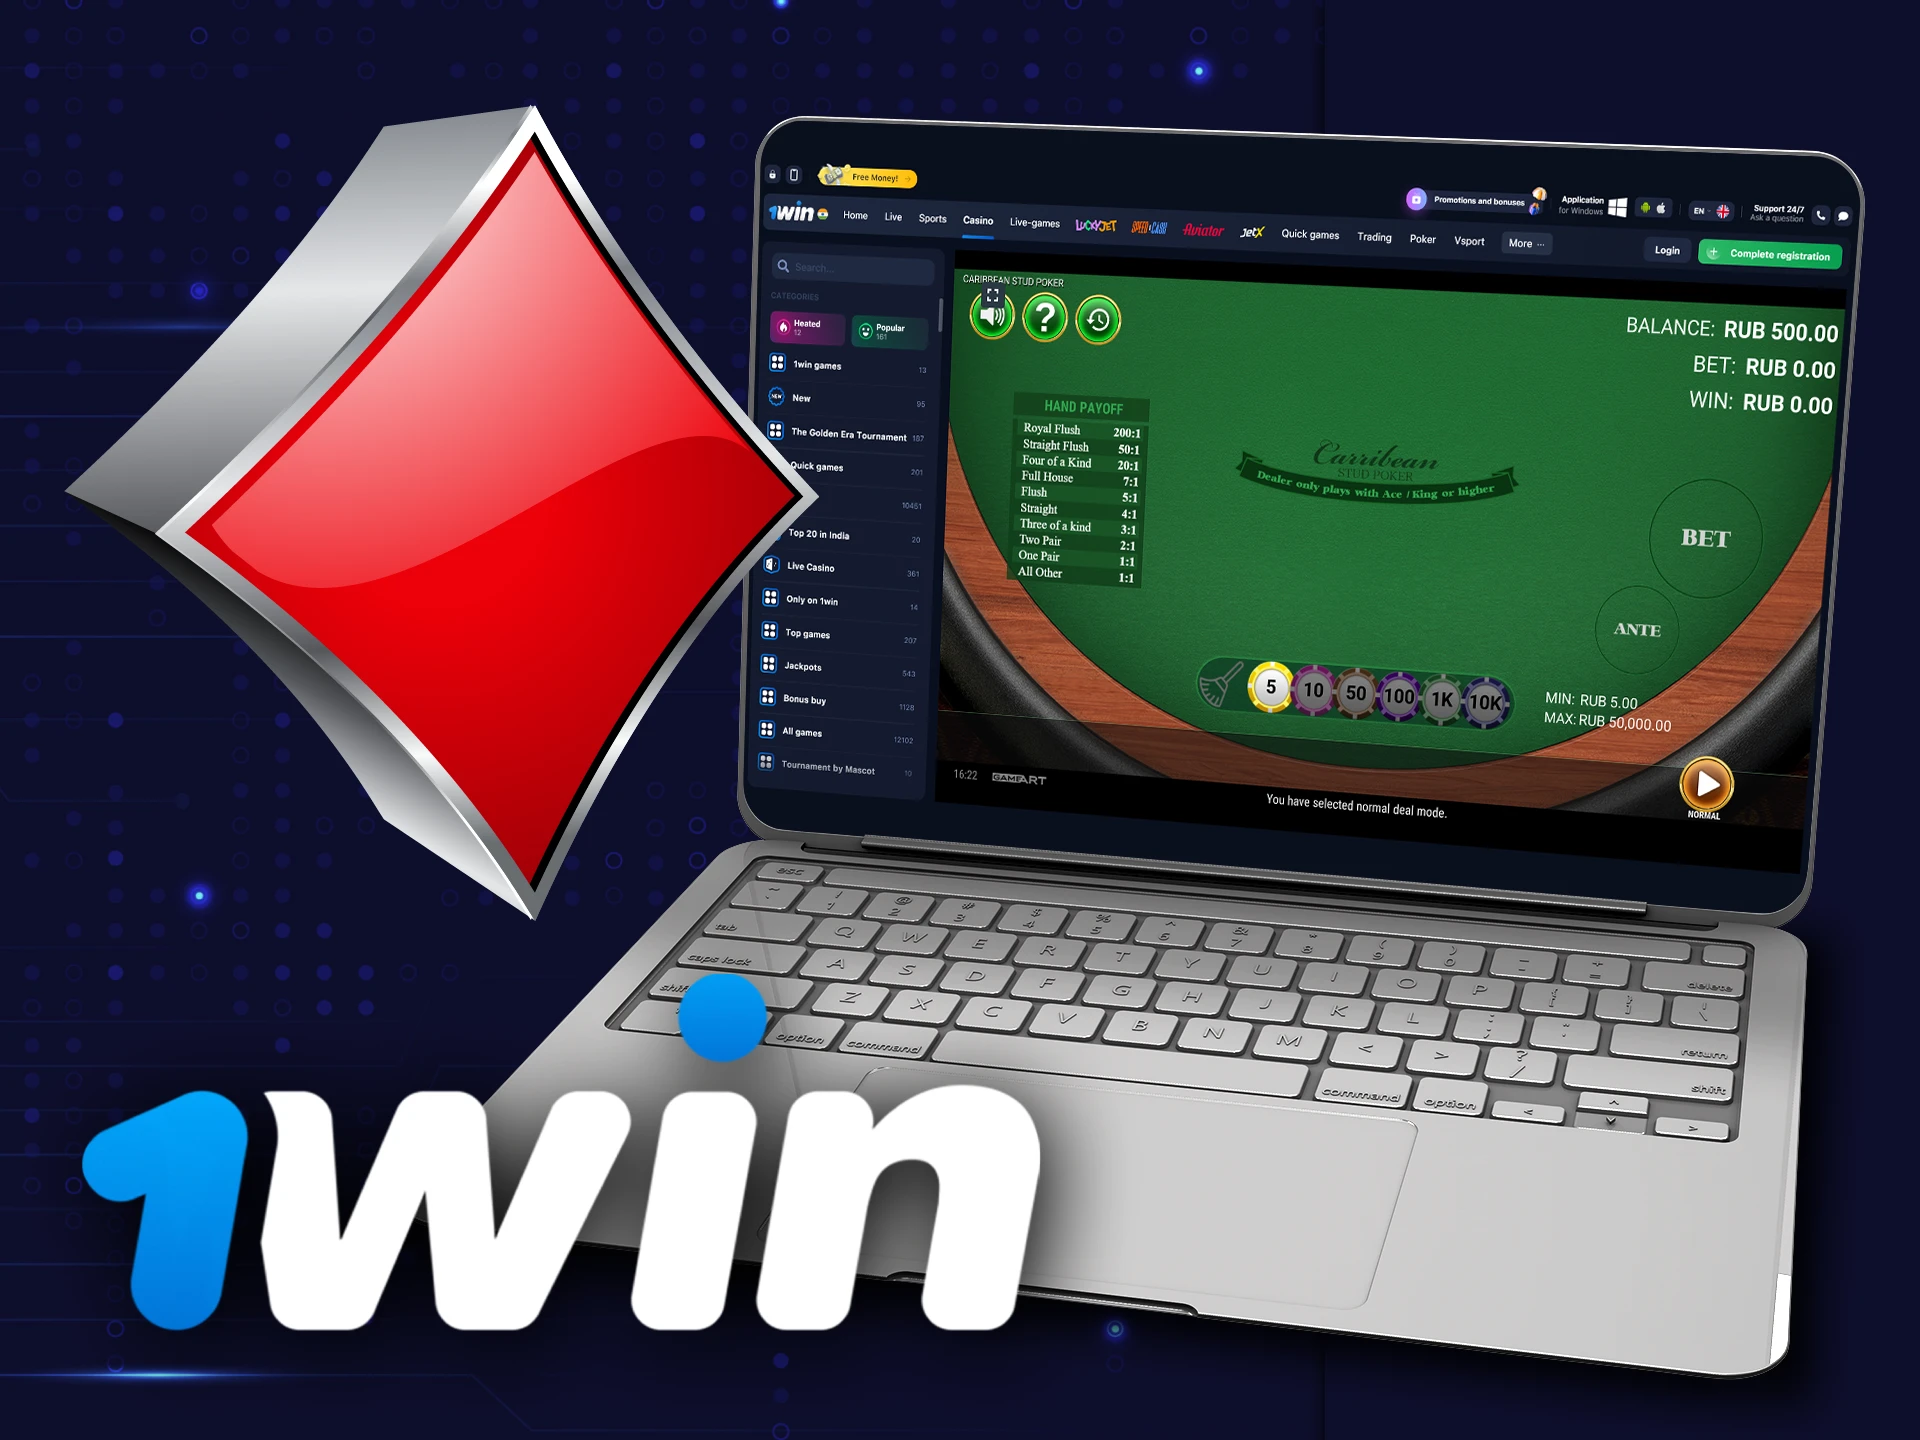 Try yourself in the stud version of poker in the 1win casino.